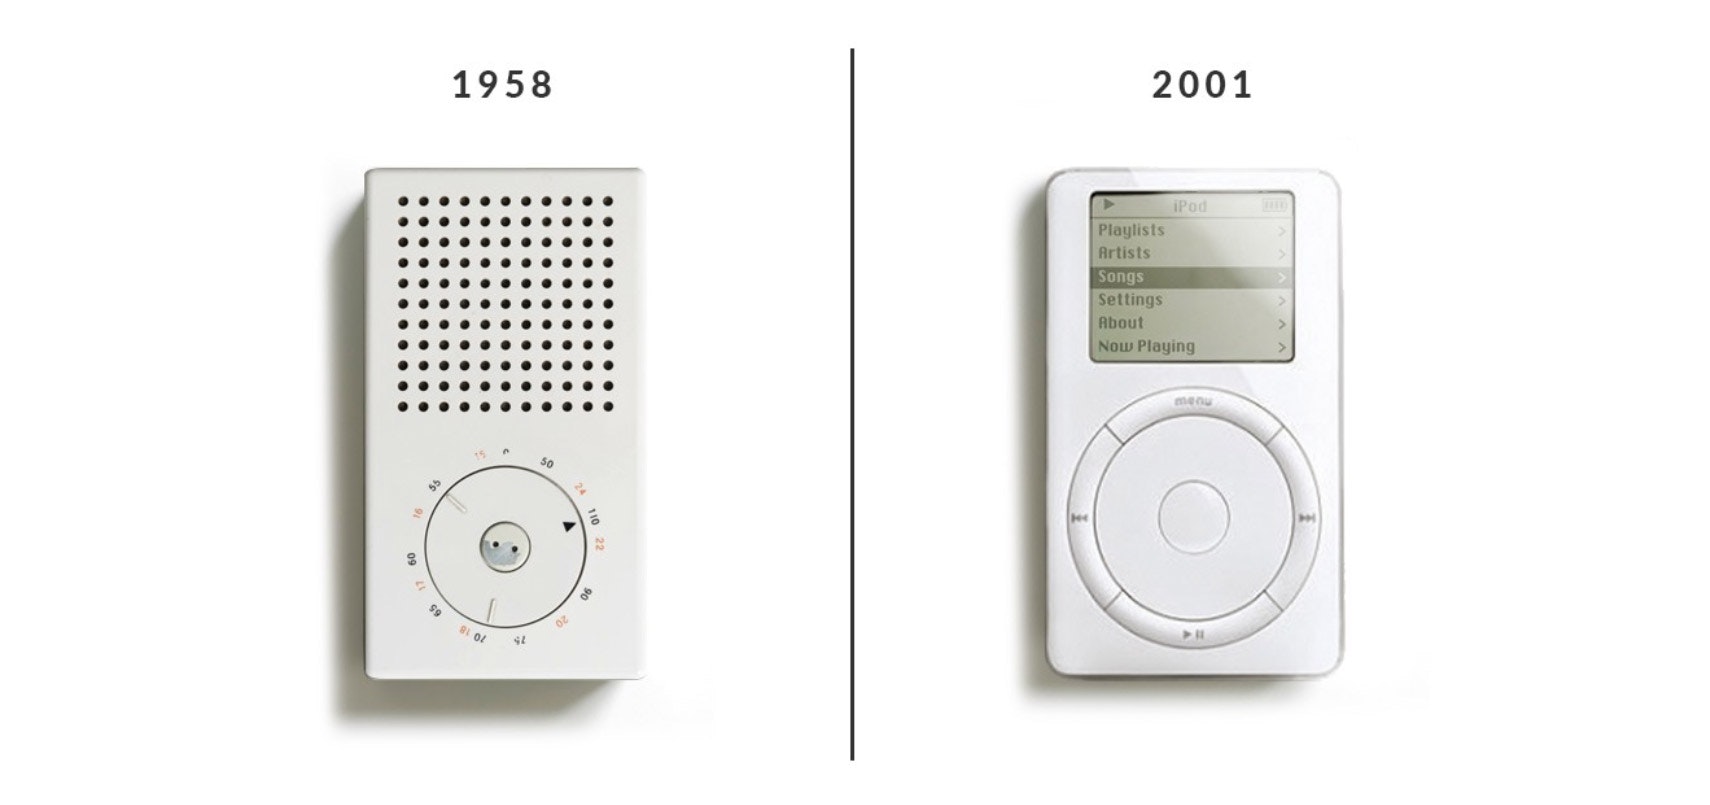 A side-by-side comparison that shows how heavily influenced the 2001 iPod was by Dieter Rams' transistor radio design.